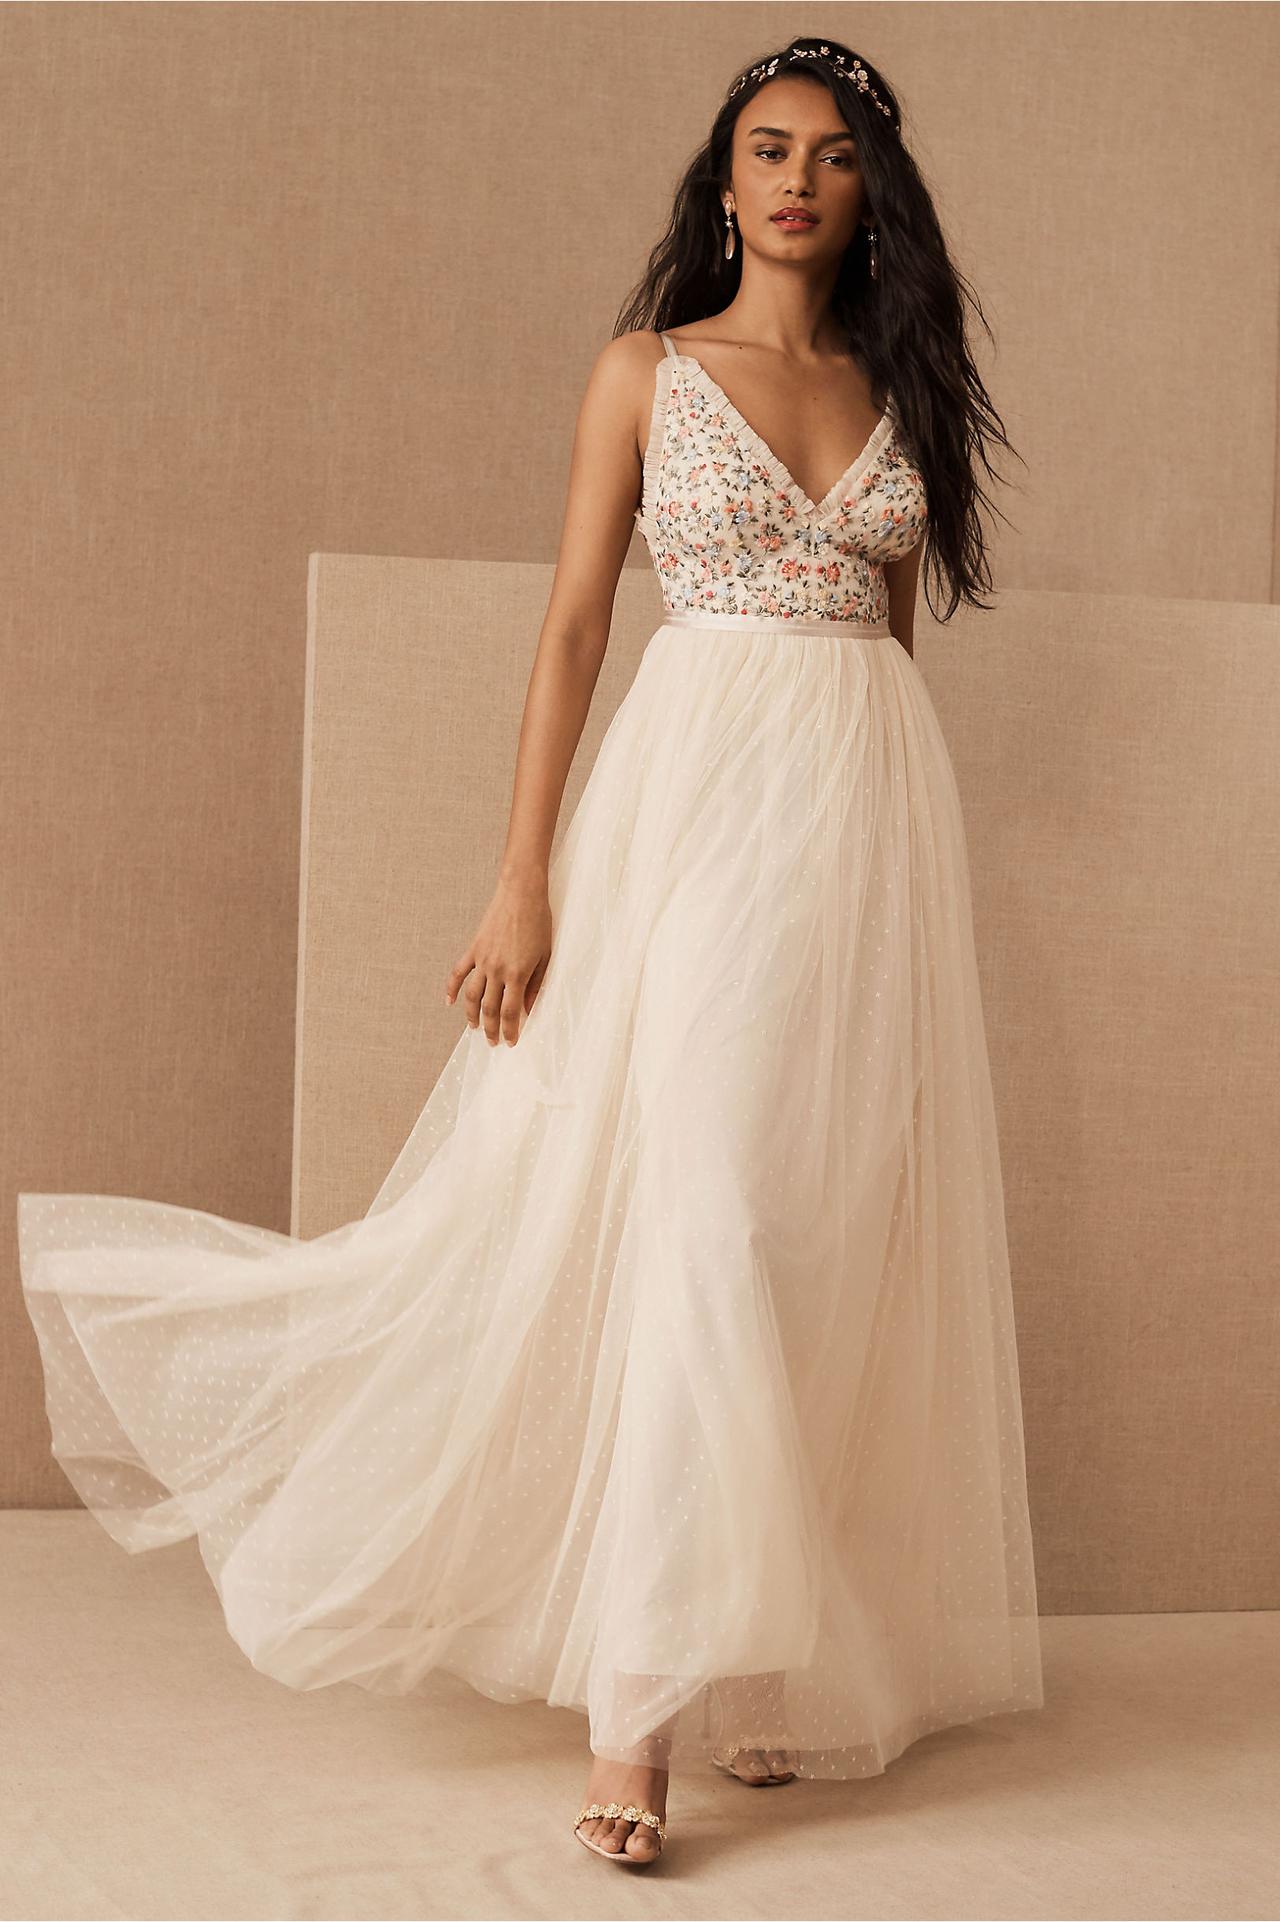 Editor's Picks: The Best Courthouse Wedding Dresses